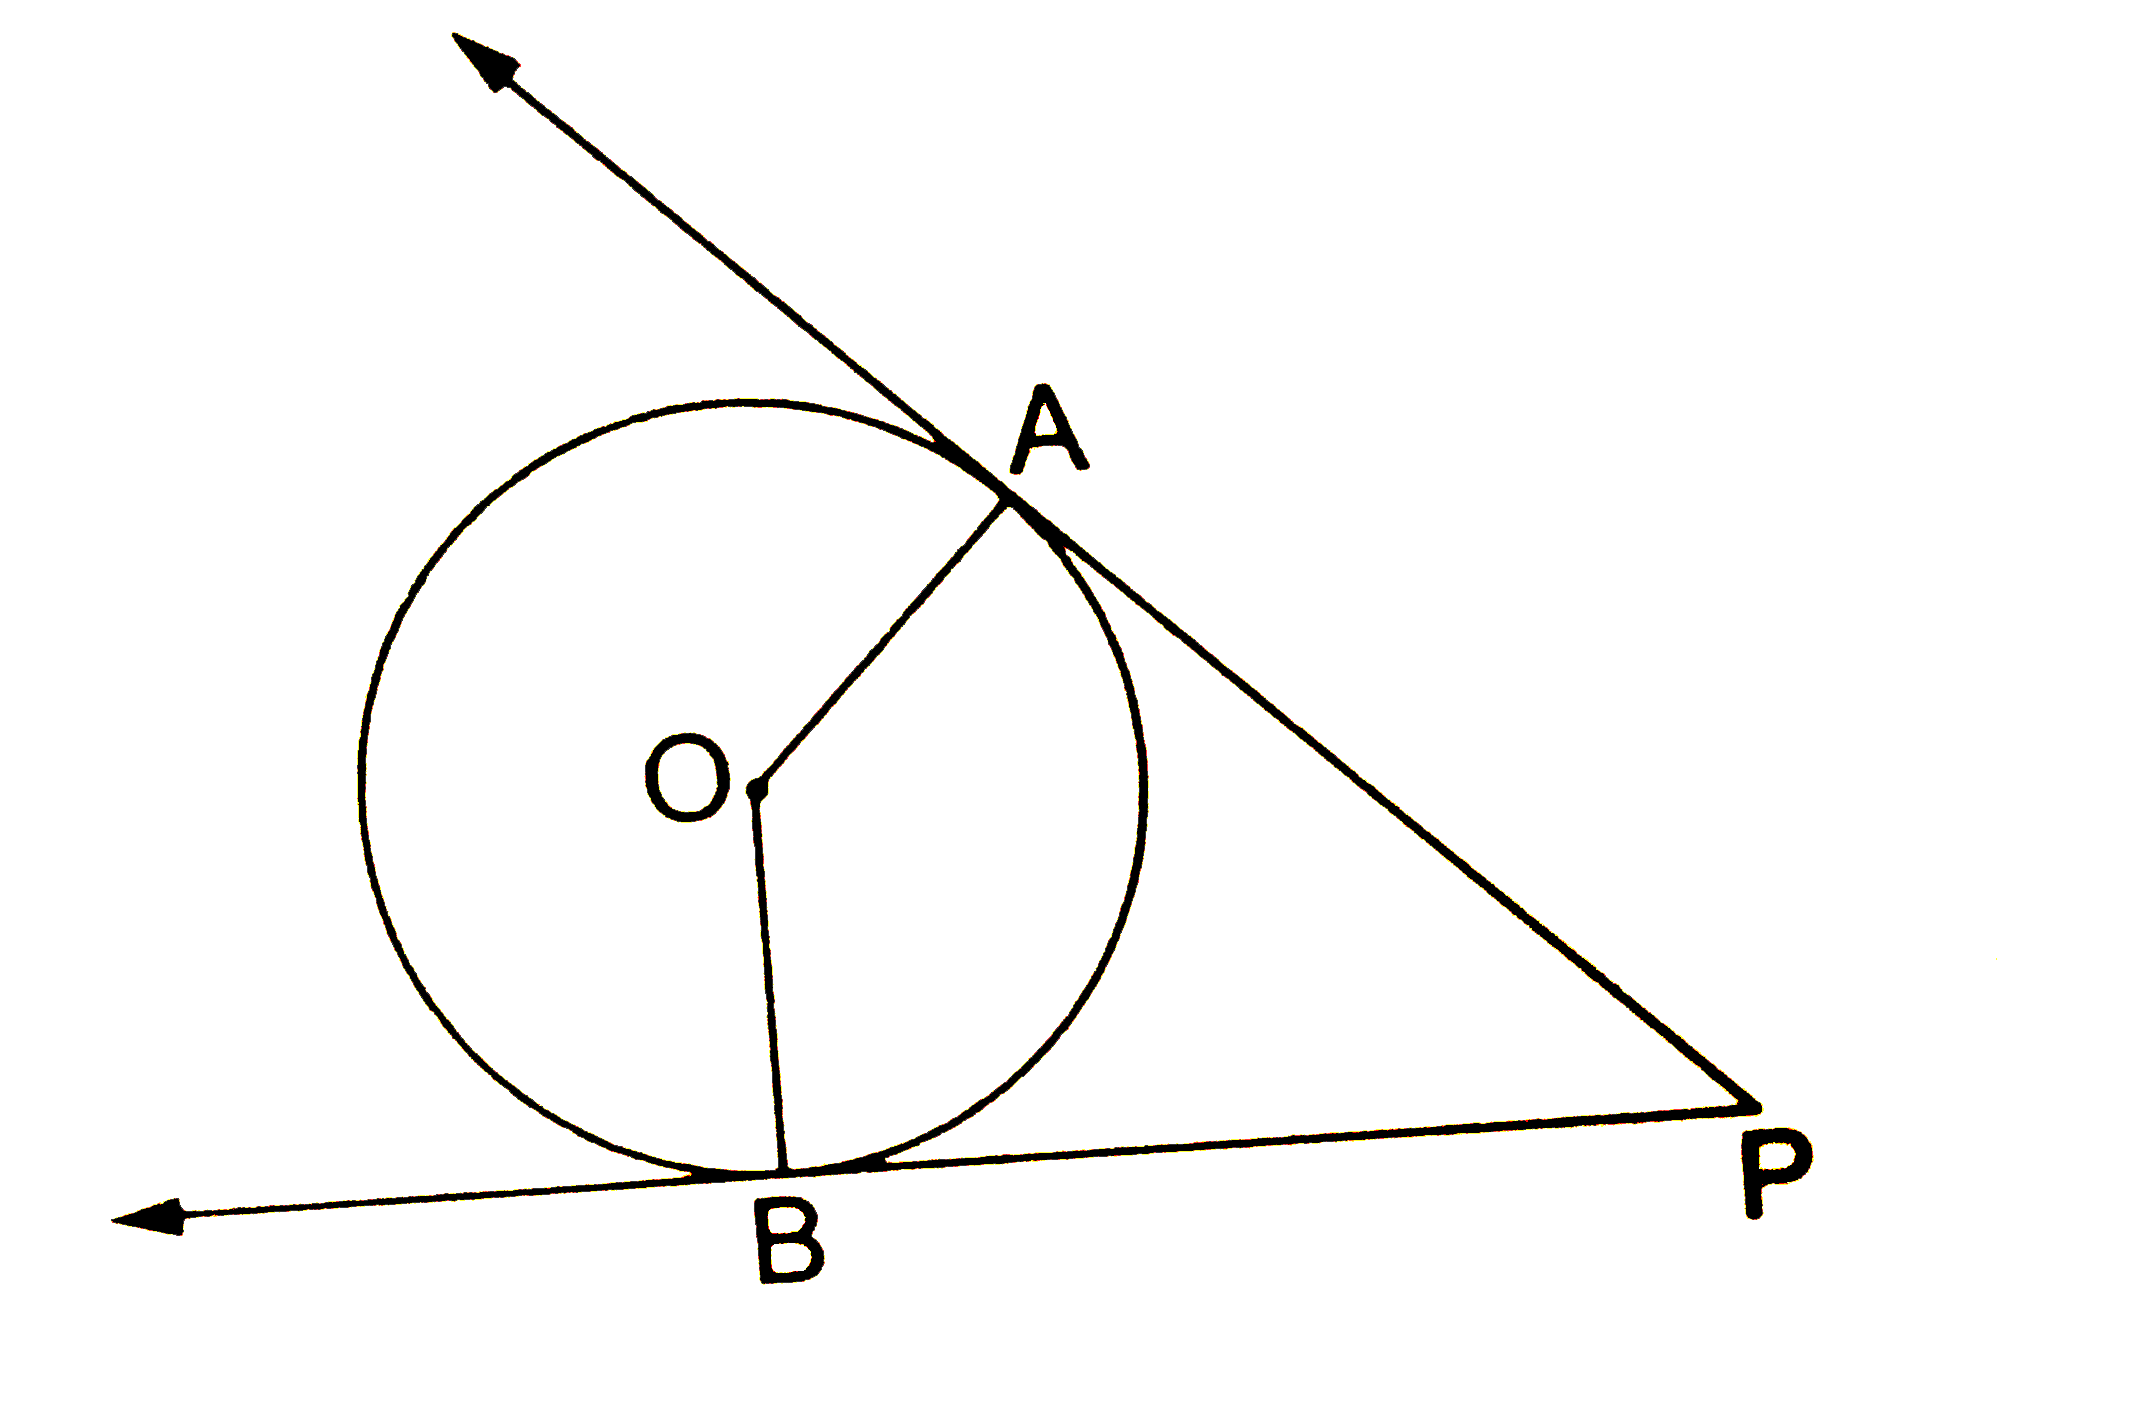 In the given figure, O is the centre of the circle. PA and PB are tangent segments. Show that the quadrilateral AOBP is cyclic.